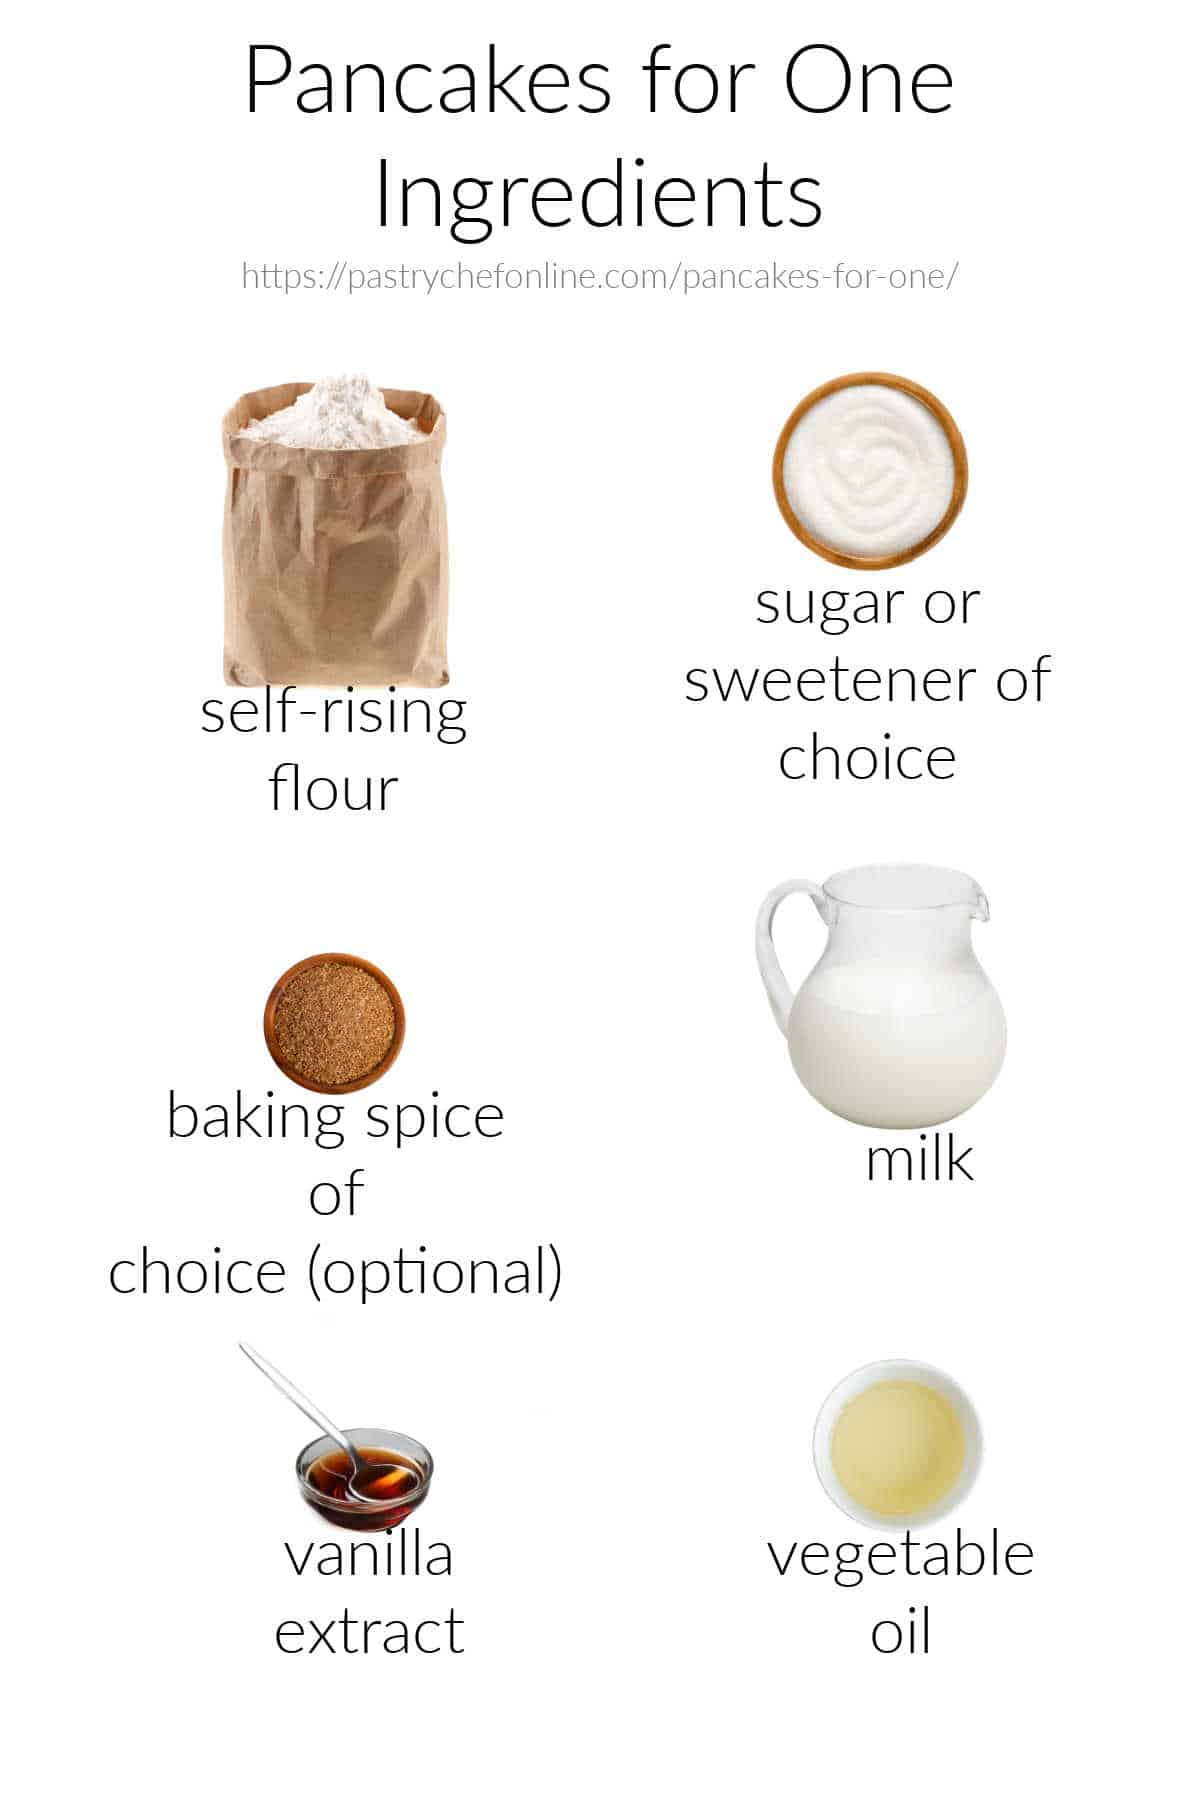 A photo collage of the ingredients needed to make pancakes for one on a white background.